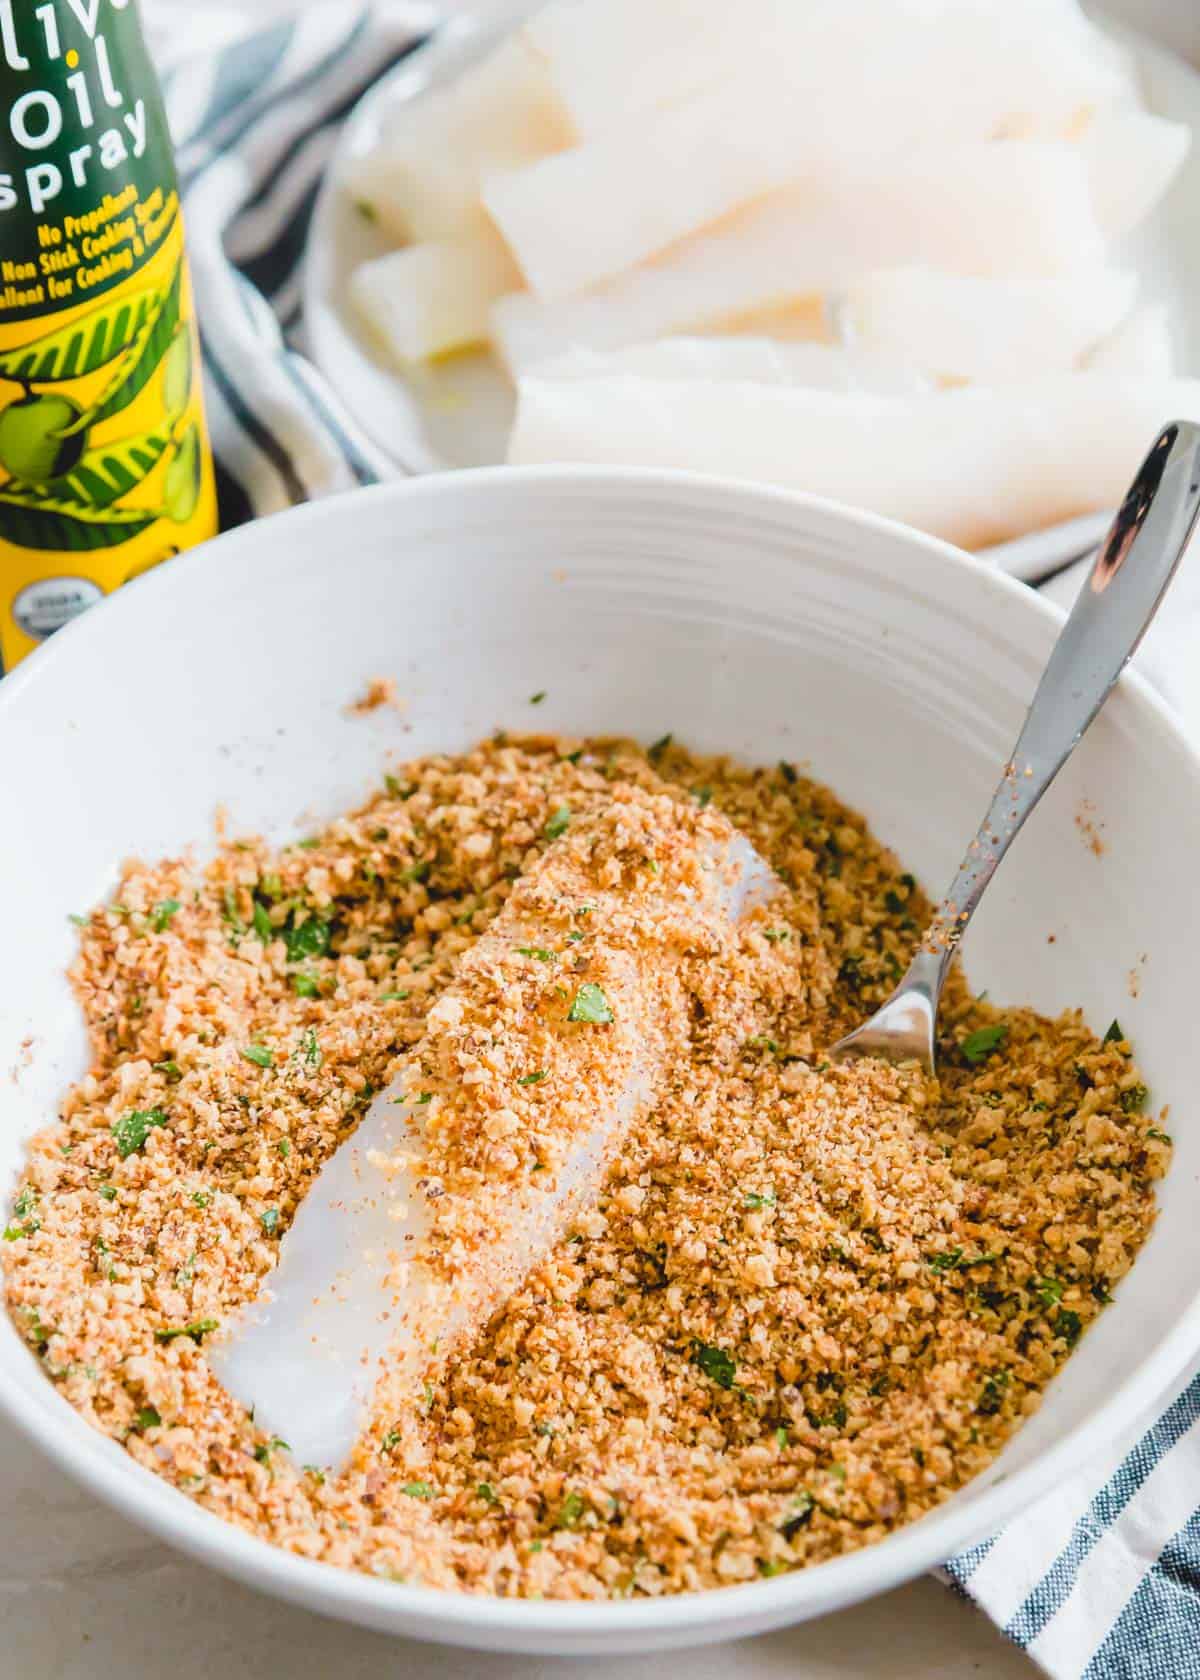 Gluten-free breadcrumbs, ground flax seed, salt, pepper and fresh parsley coat fresh pieces of wild caught cod for this easy air fryer fish stick recipe.